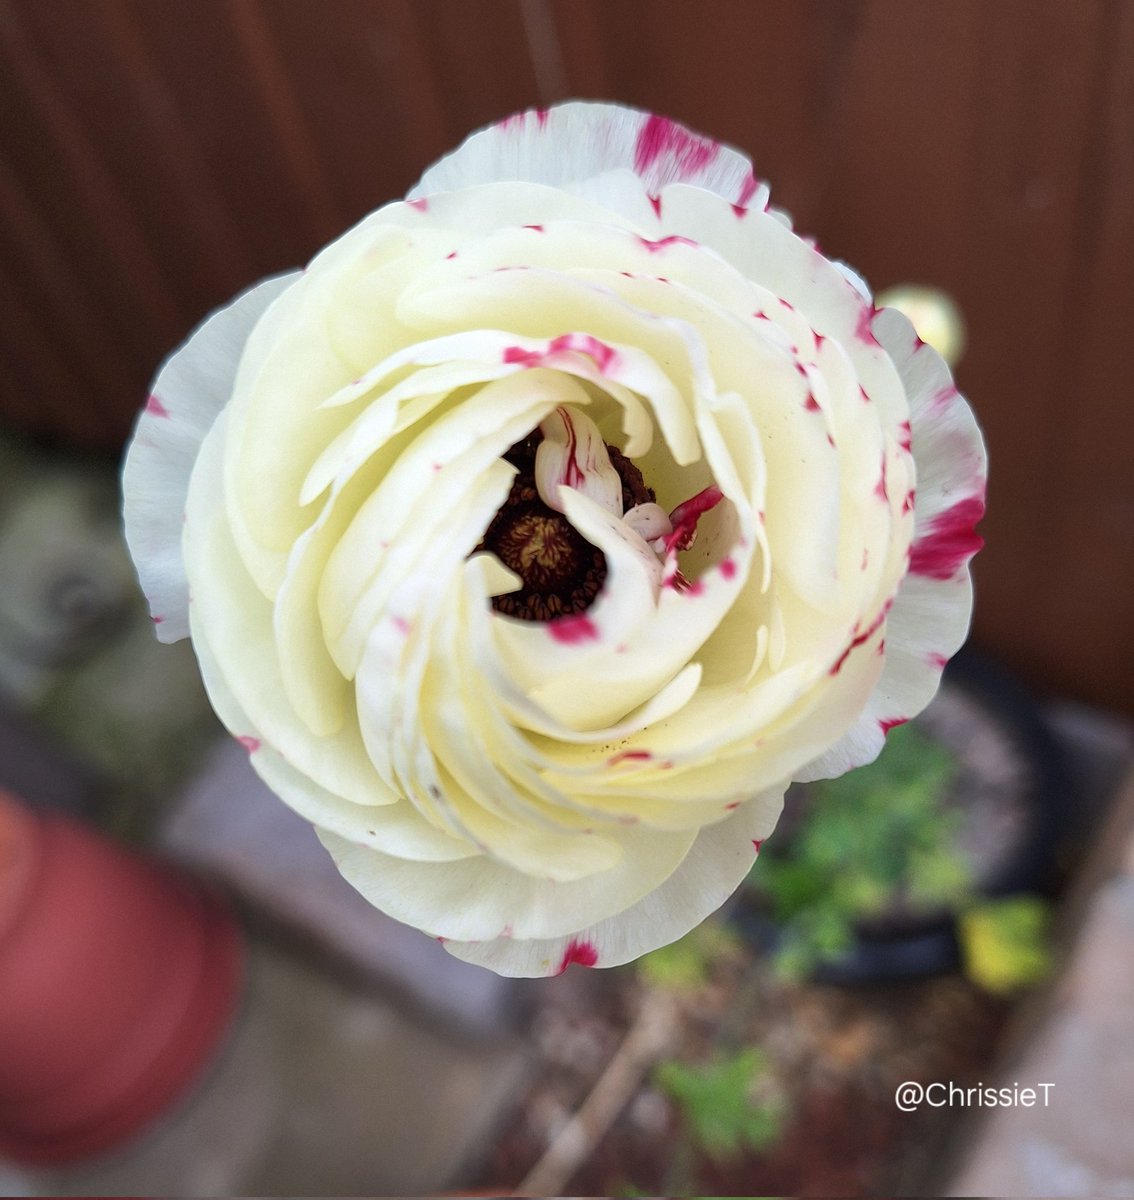 Tried growing ranunculus last year which was not a success, left the pot at the bottom of the garden and forgot about it and this beauty appeared this week, was delighted.
🤍💕 Enjoy your day 💕🤍
#Flowers #MyGarden #Gardening #GardeningTwitter #GardeningX